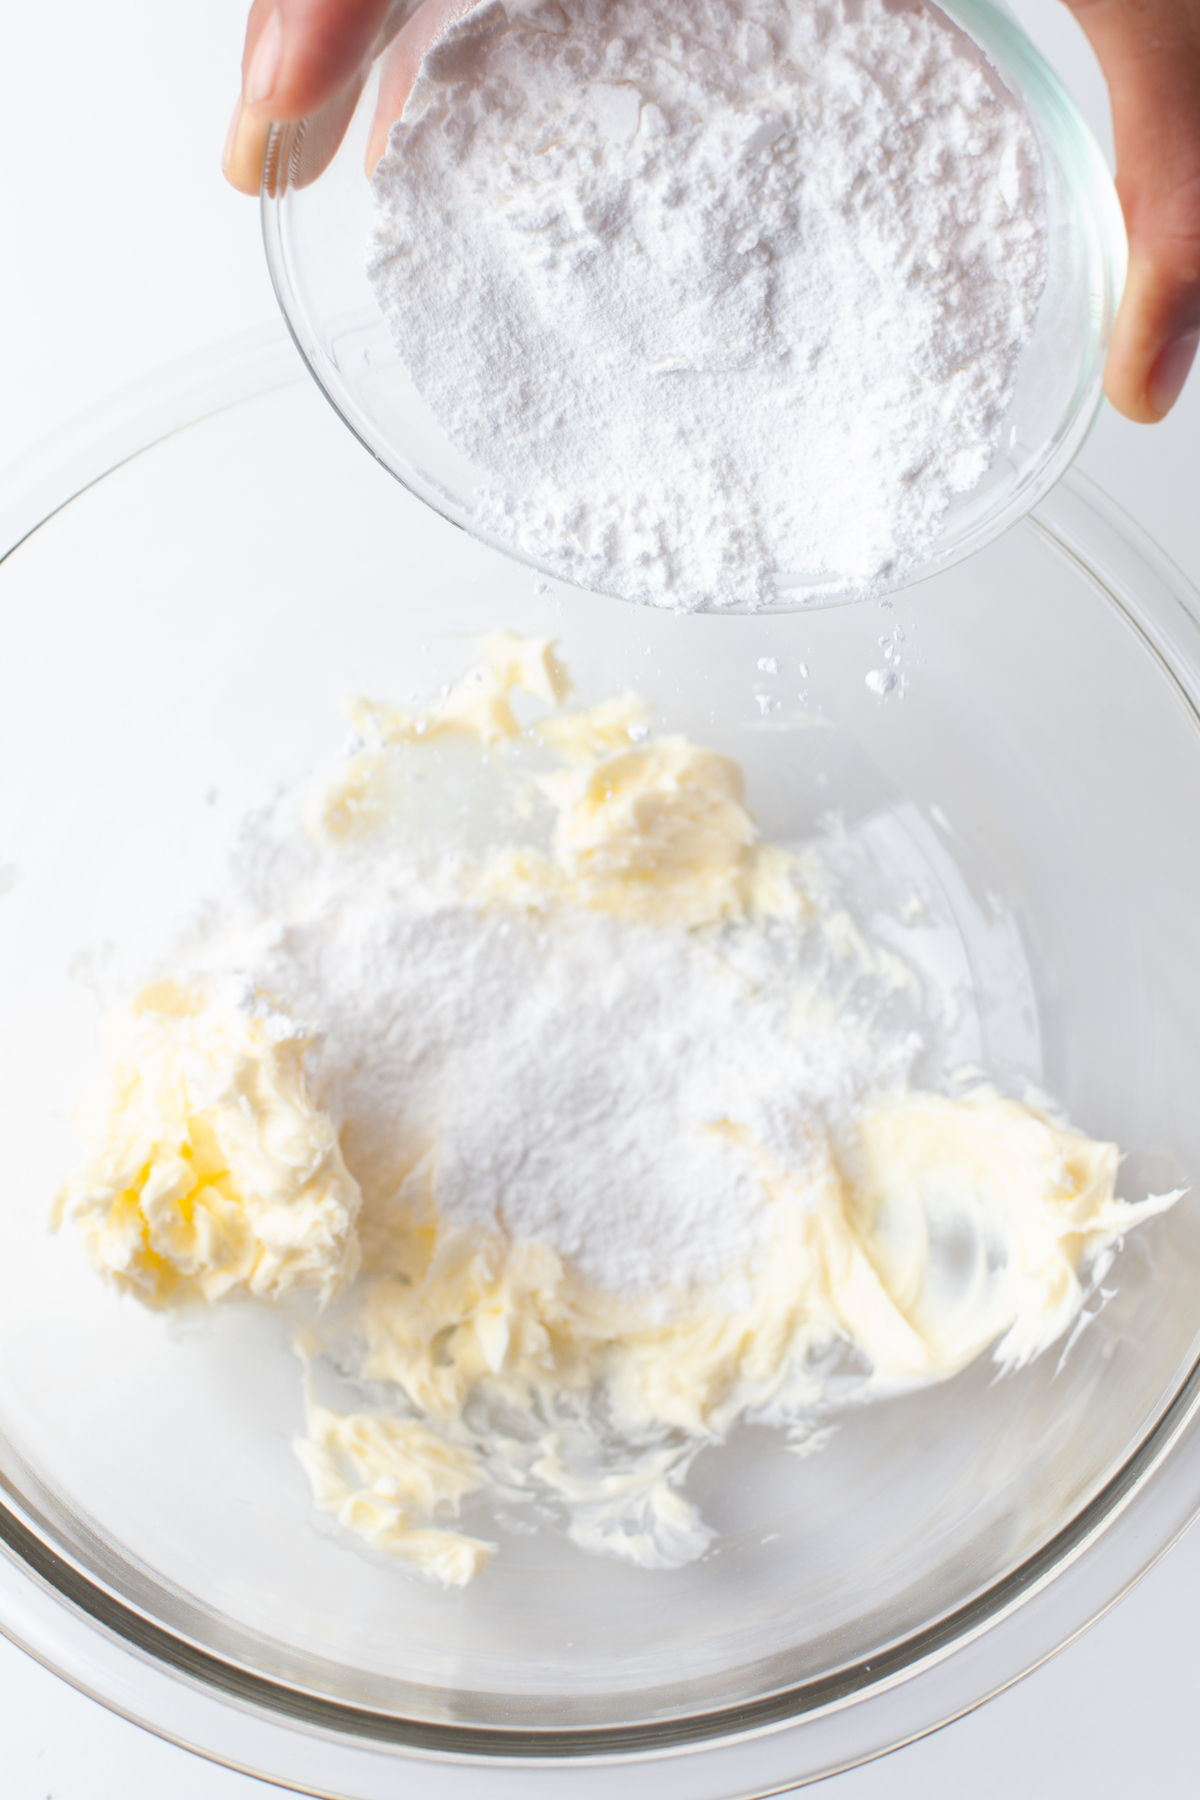 Dry ingredients being added to the creamed butter and sugar in a glass bowl